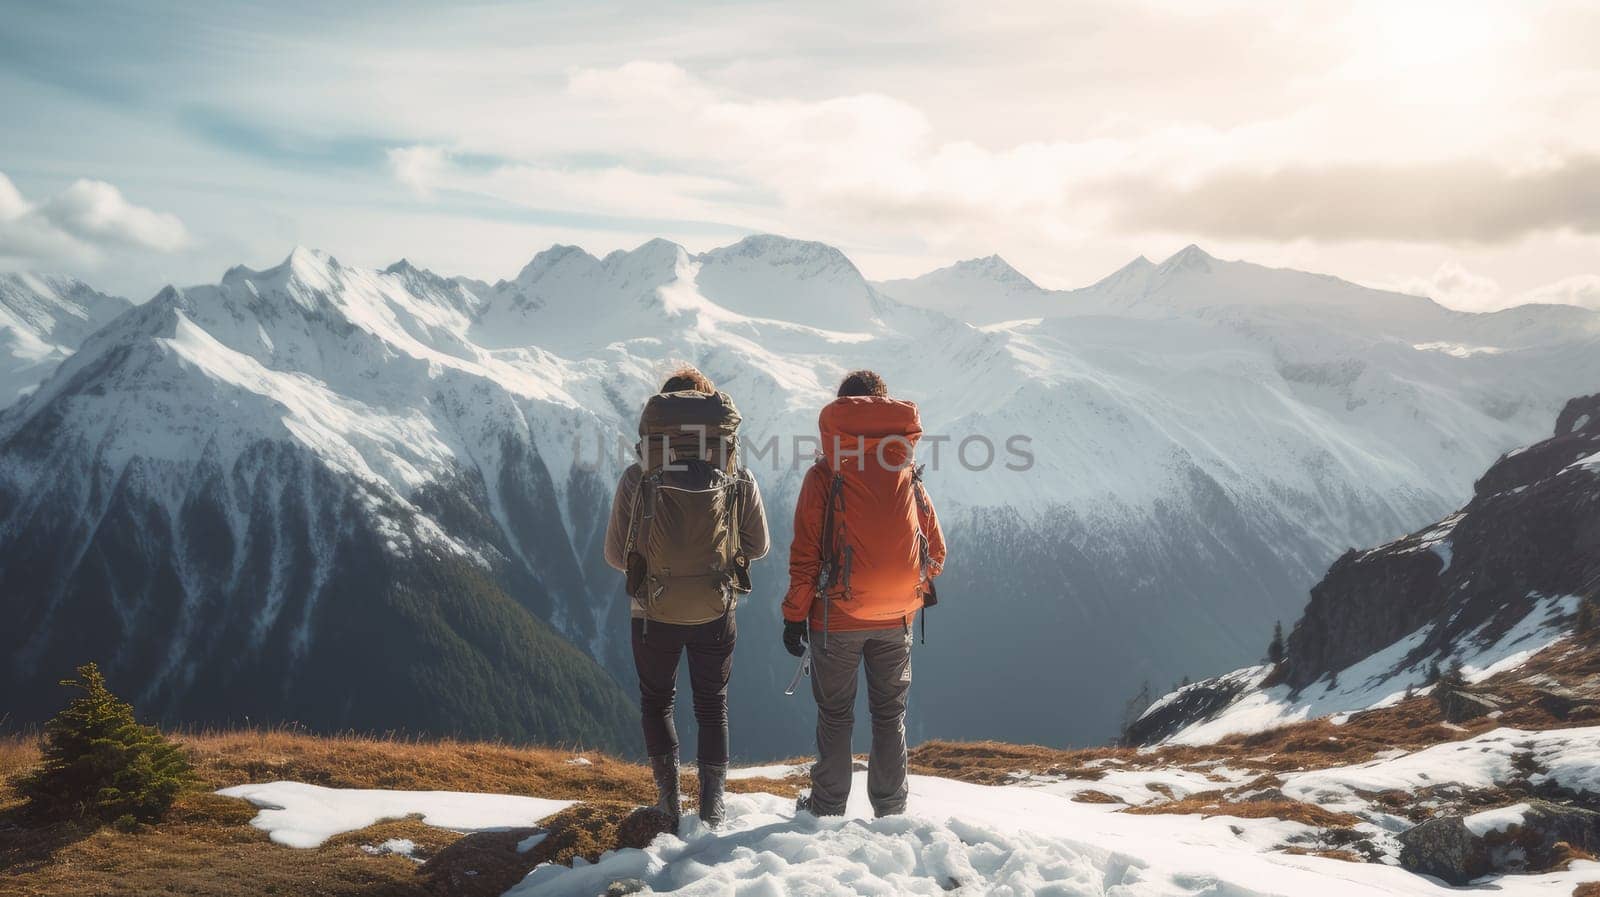 Happy, young loving couple high on snowy mountains at a ski resort, during vacation and winter holidays. Concept of traveling around the world, recreation, winter sports, vacations, tourism in the mountains and unusual places.